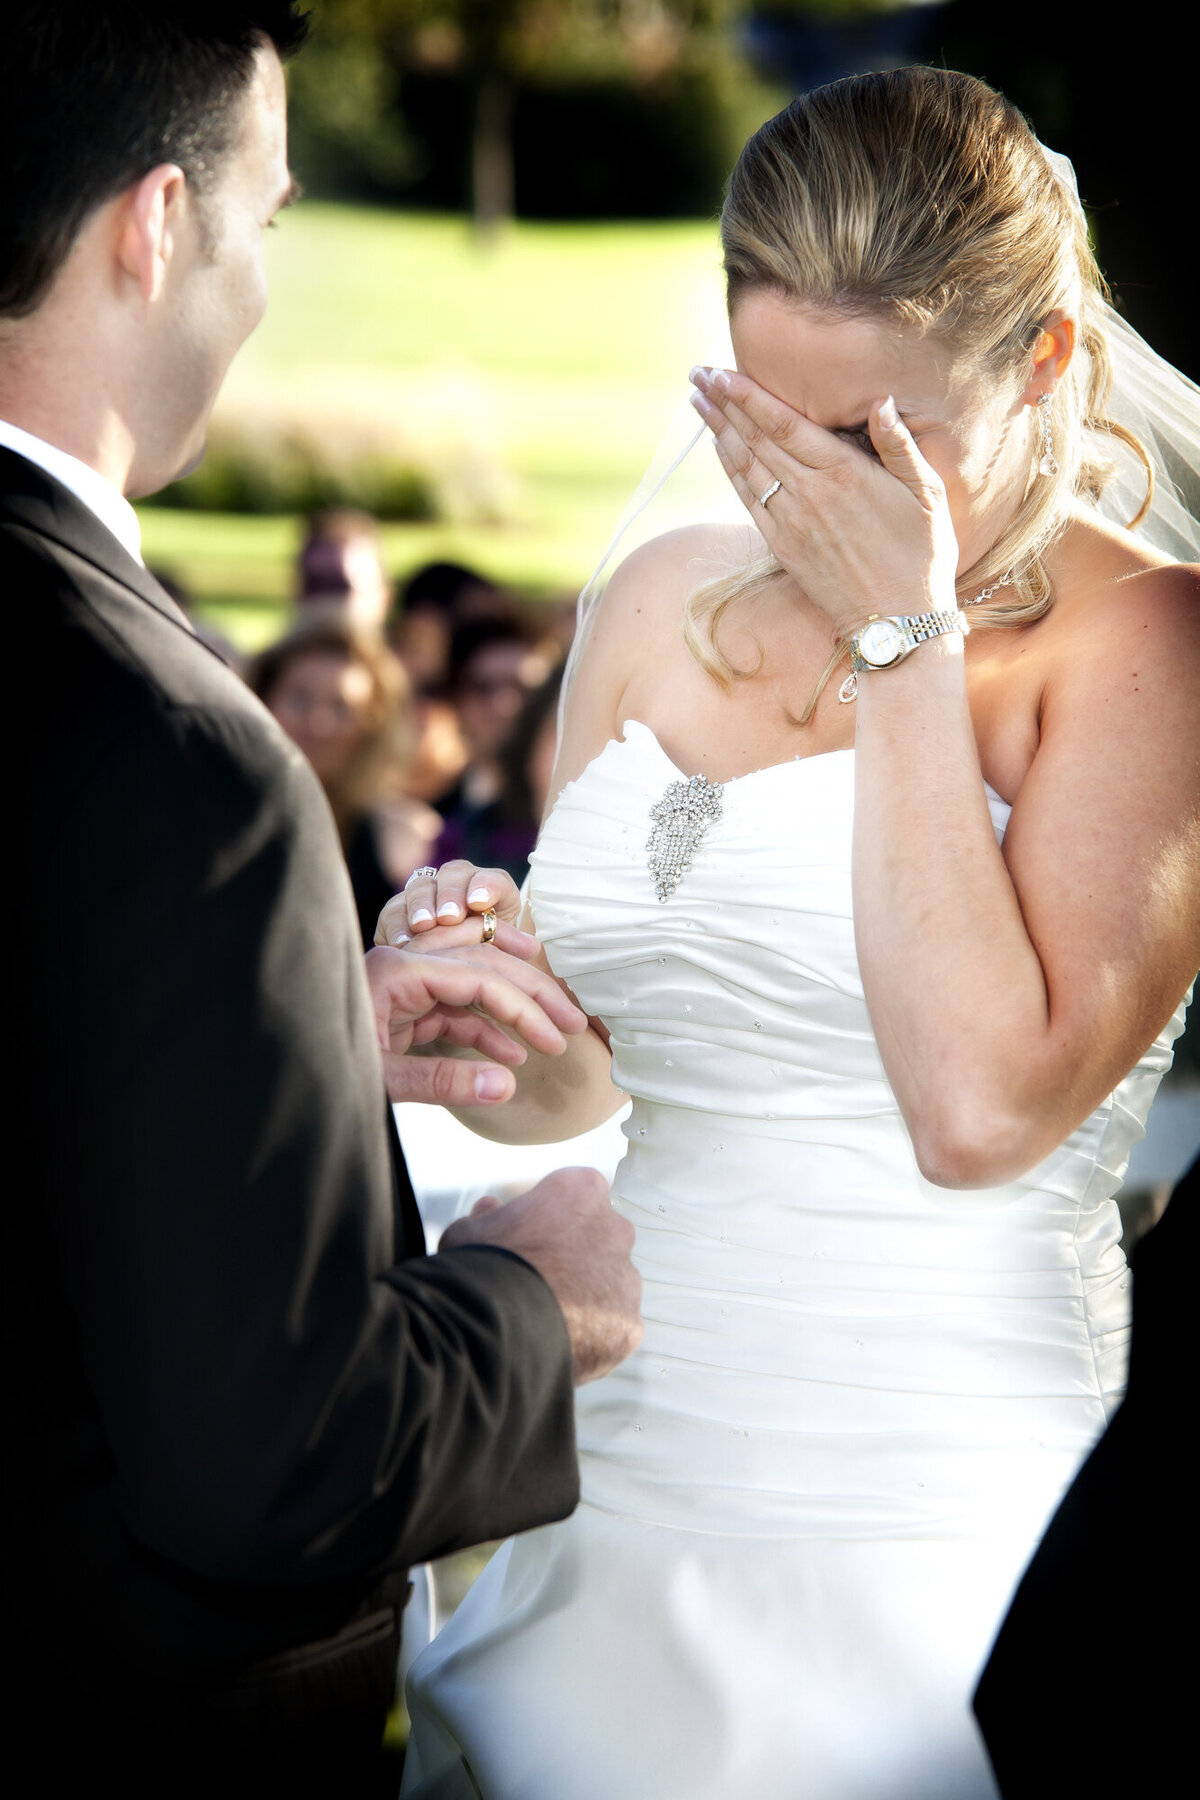 A bride cries while exchanging vows during an outdoor wedding ceremony.